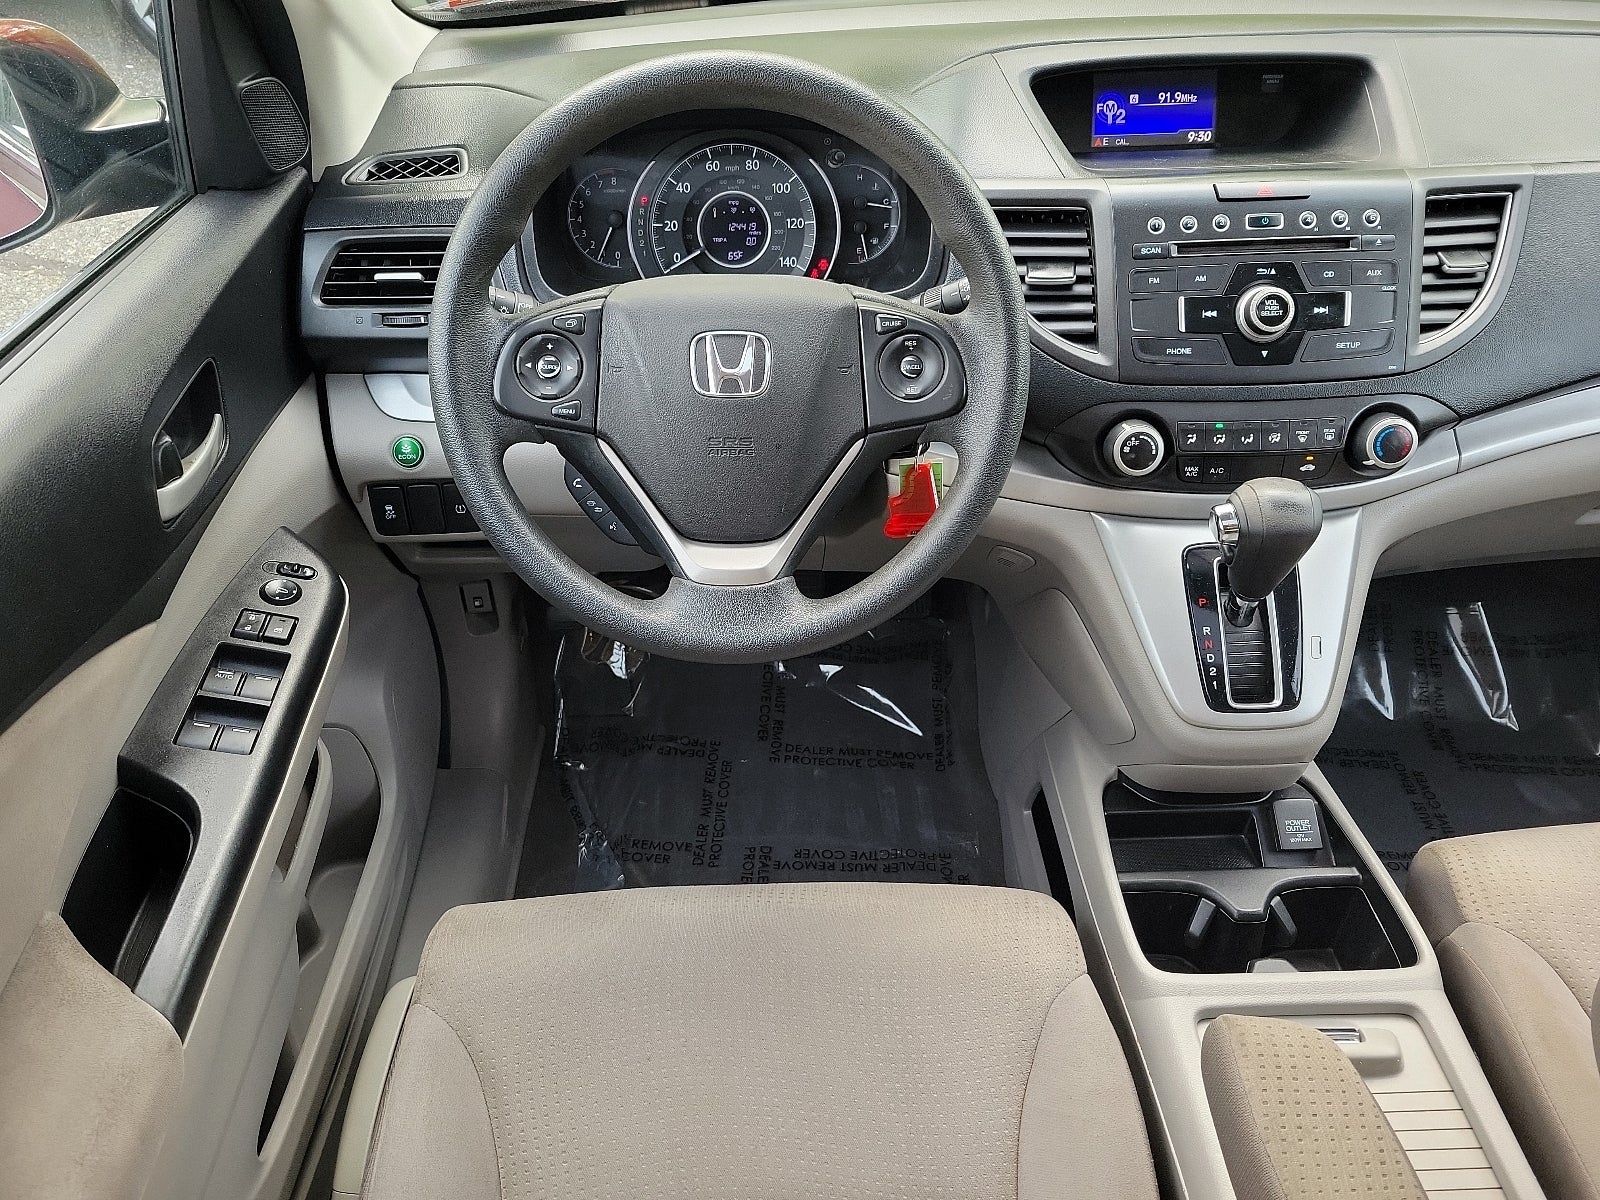 Used 2014 Honda CR-V EX with VIN 5J6RM4H59EL056344 for sale in Cape May Court House, NJ